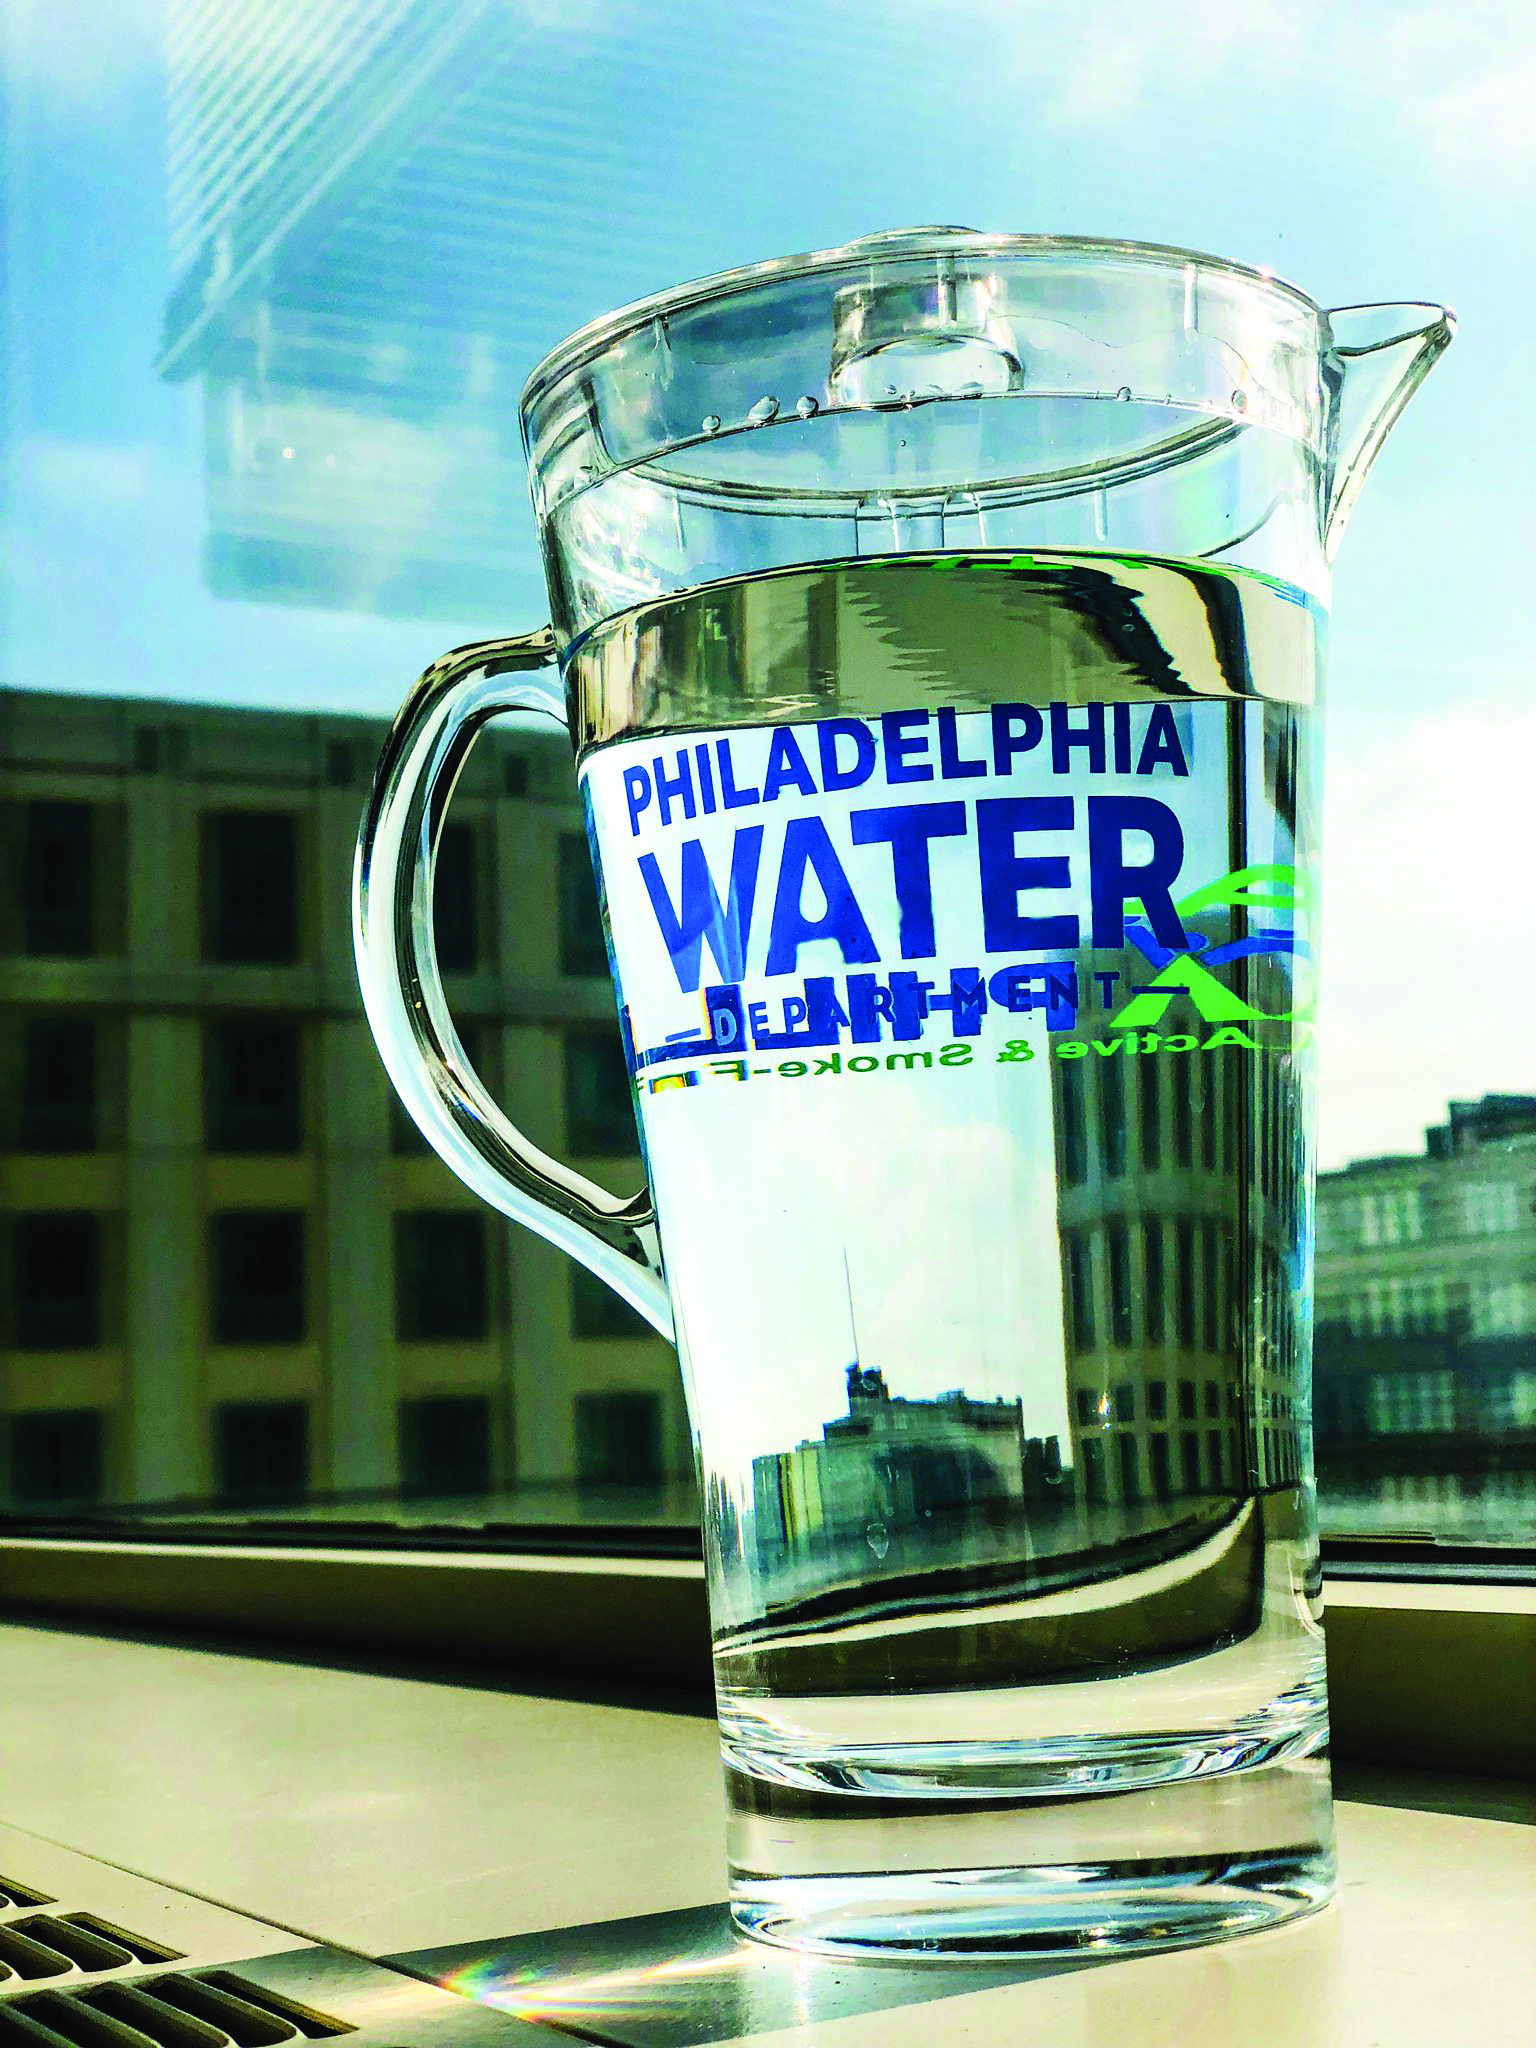 a clear plastic pitcher with the Philadelphia Water Department logo on it, full of water, sitting on a windowsill with city buildings and a blue sky visible in the background